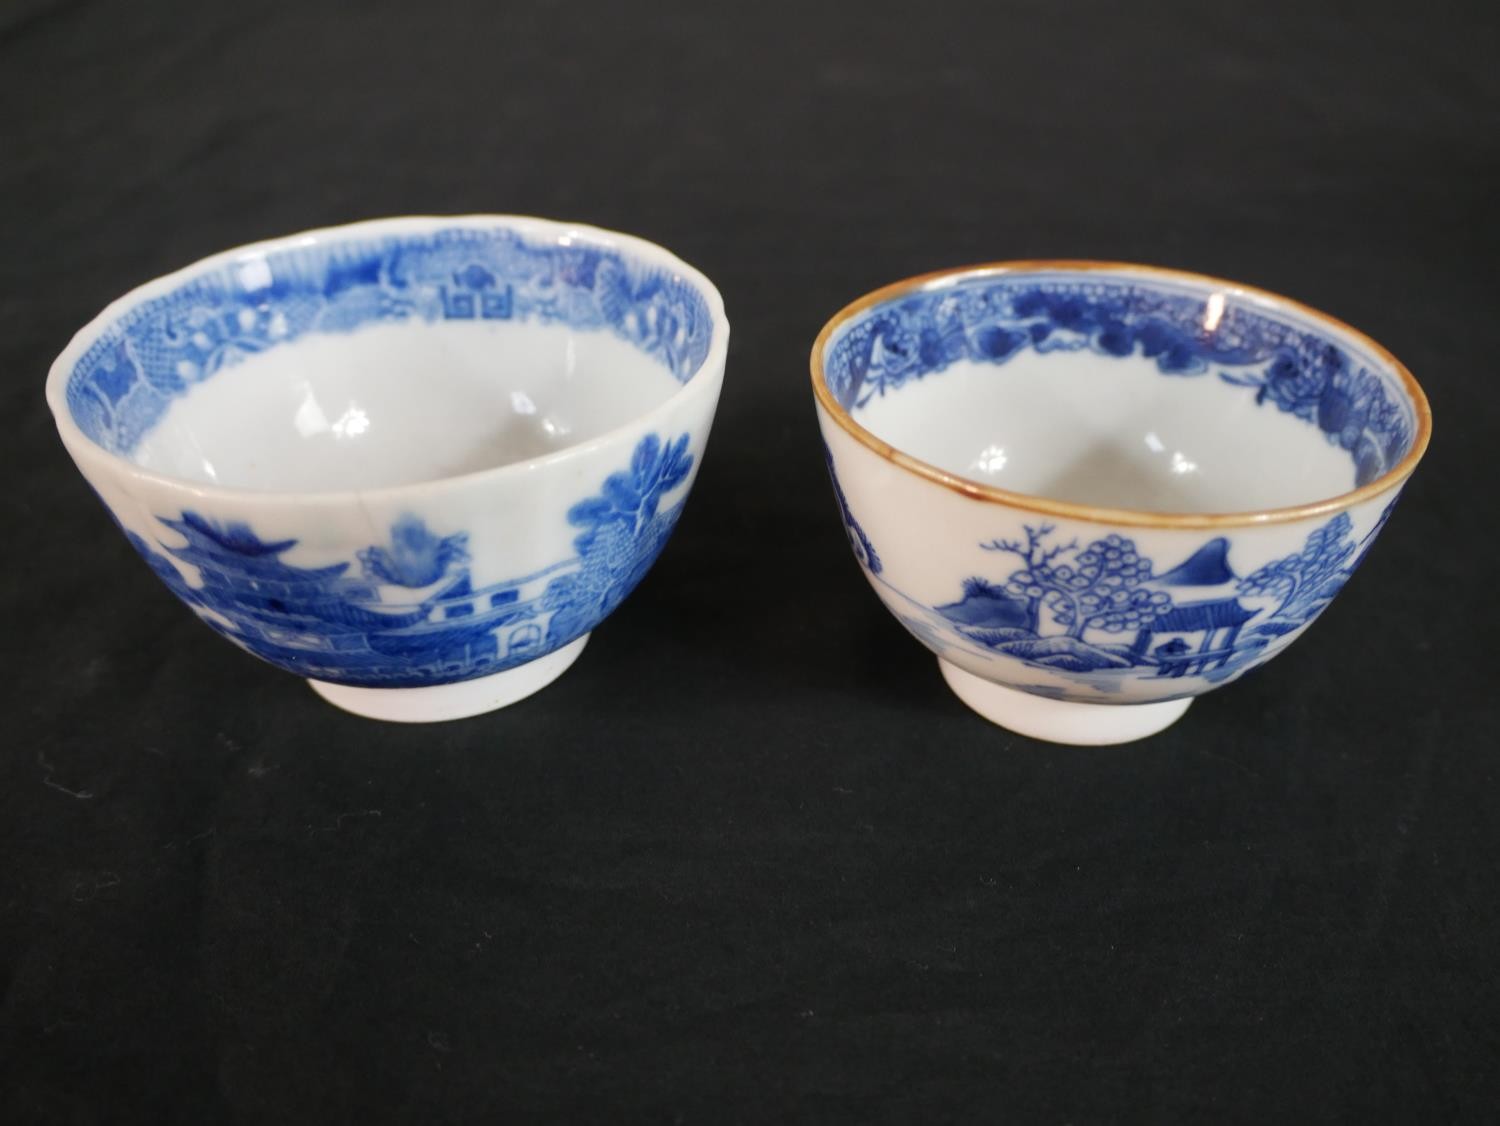 A collection of five 19th century Chinese tea bowls along with two carved and pierced hardwood - Image 2 of 7